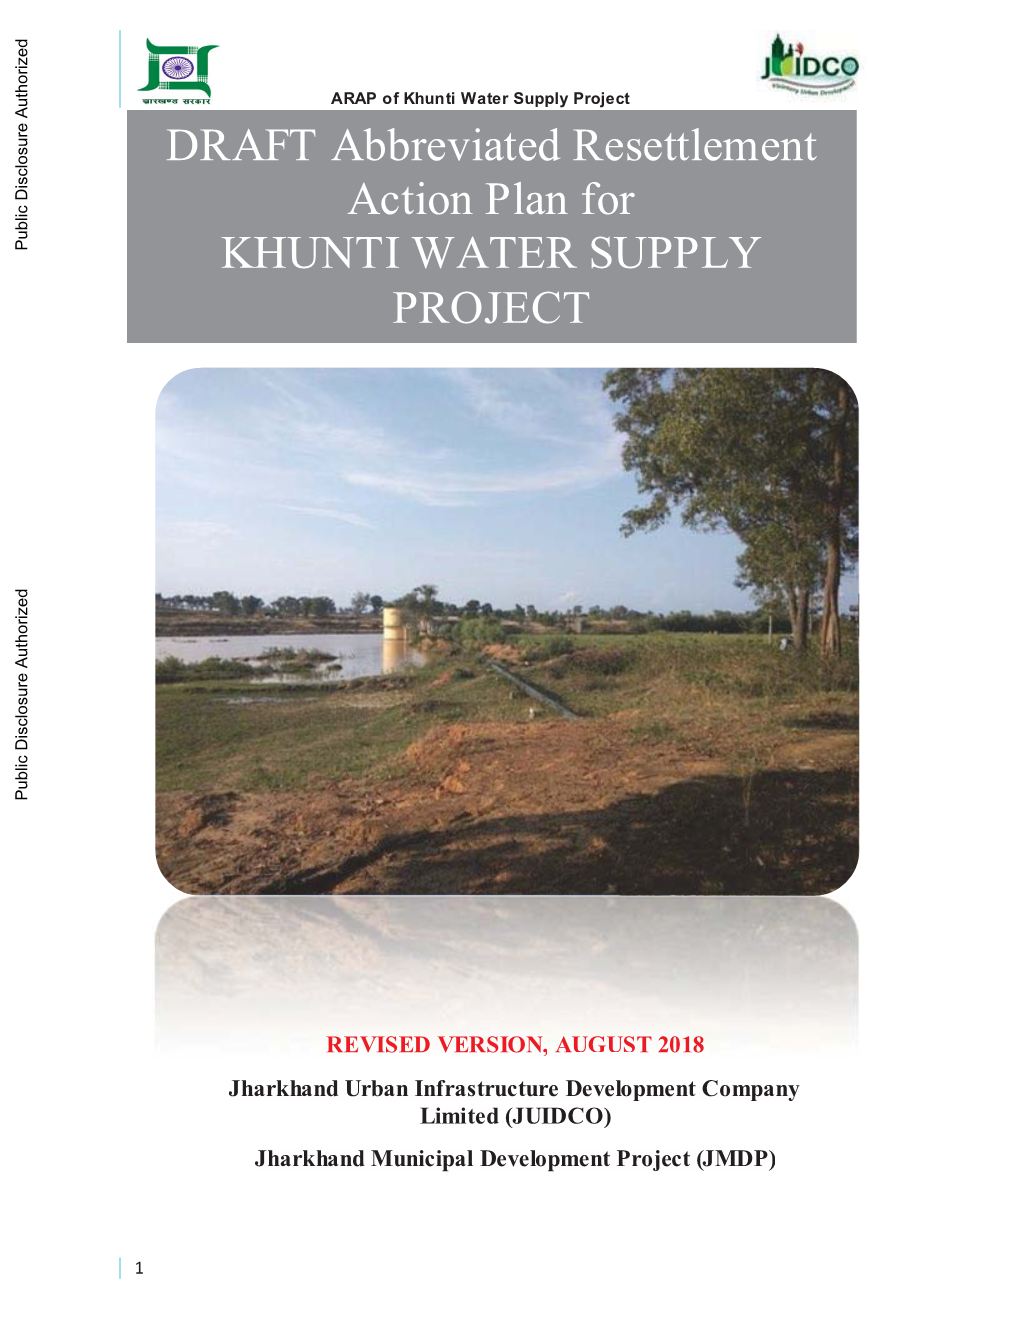 DRAFT Abbreviated Resettlement Action Plan for KHUNTI WATER SUPPLY PROJECT